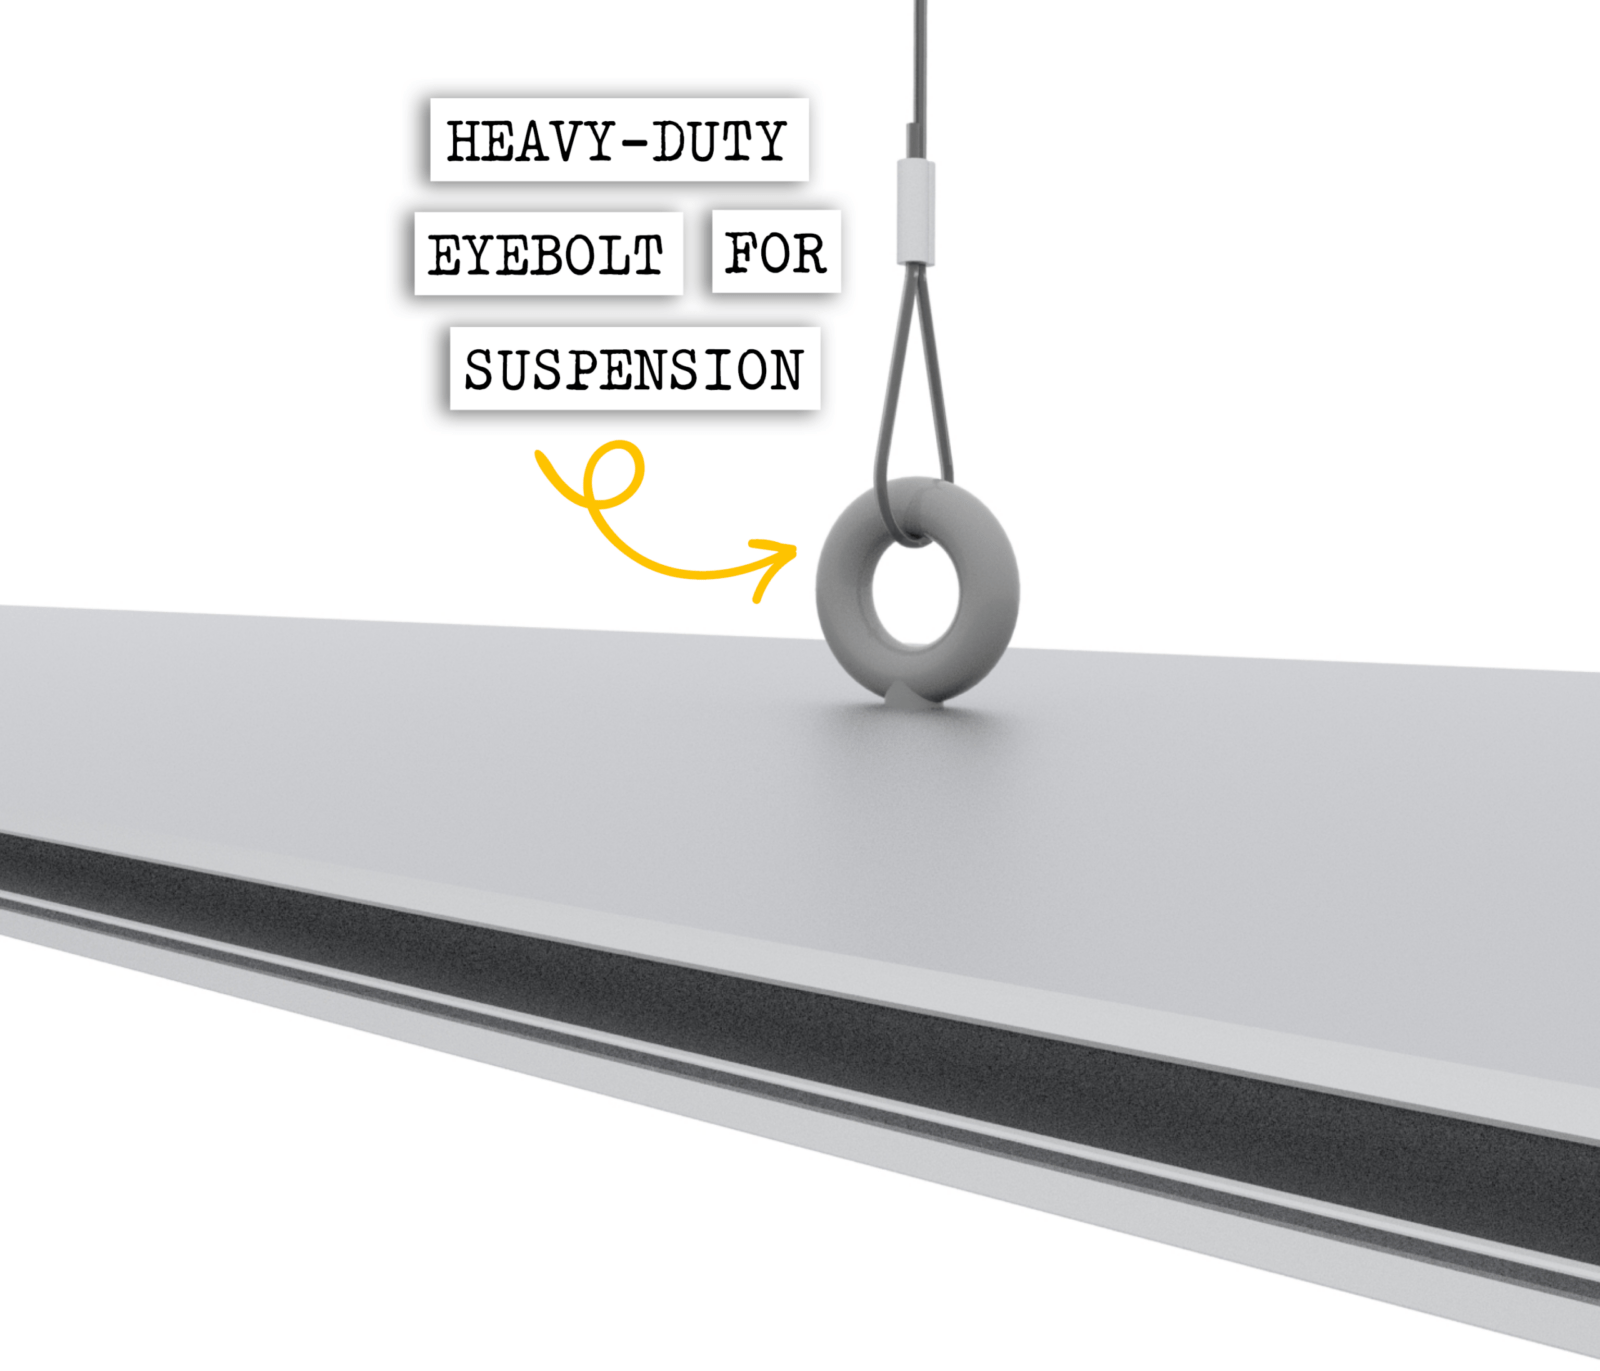 SEG Suspended Lightbox Cable Mounting Rendering with heavy-duty eyebolt for suspension